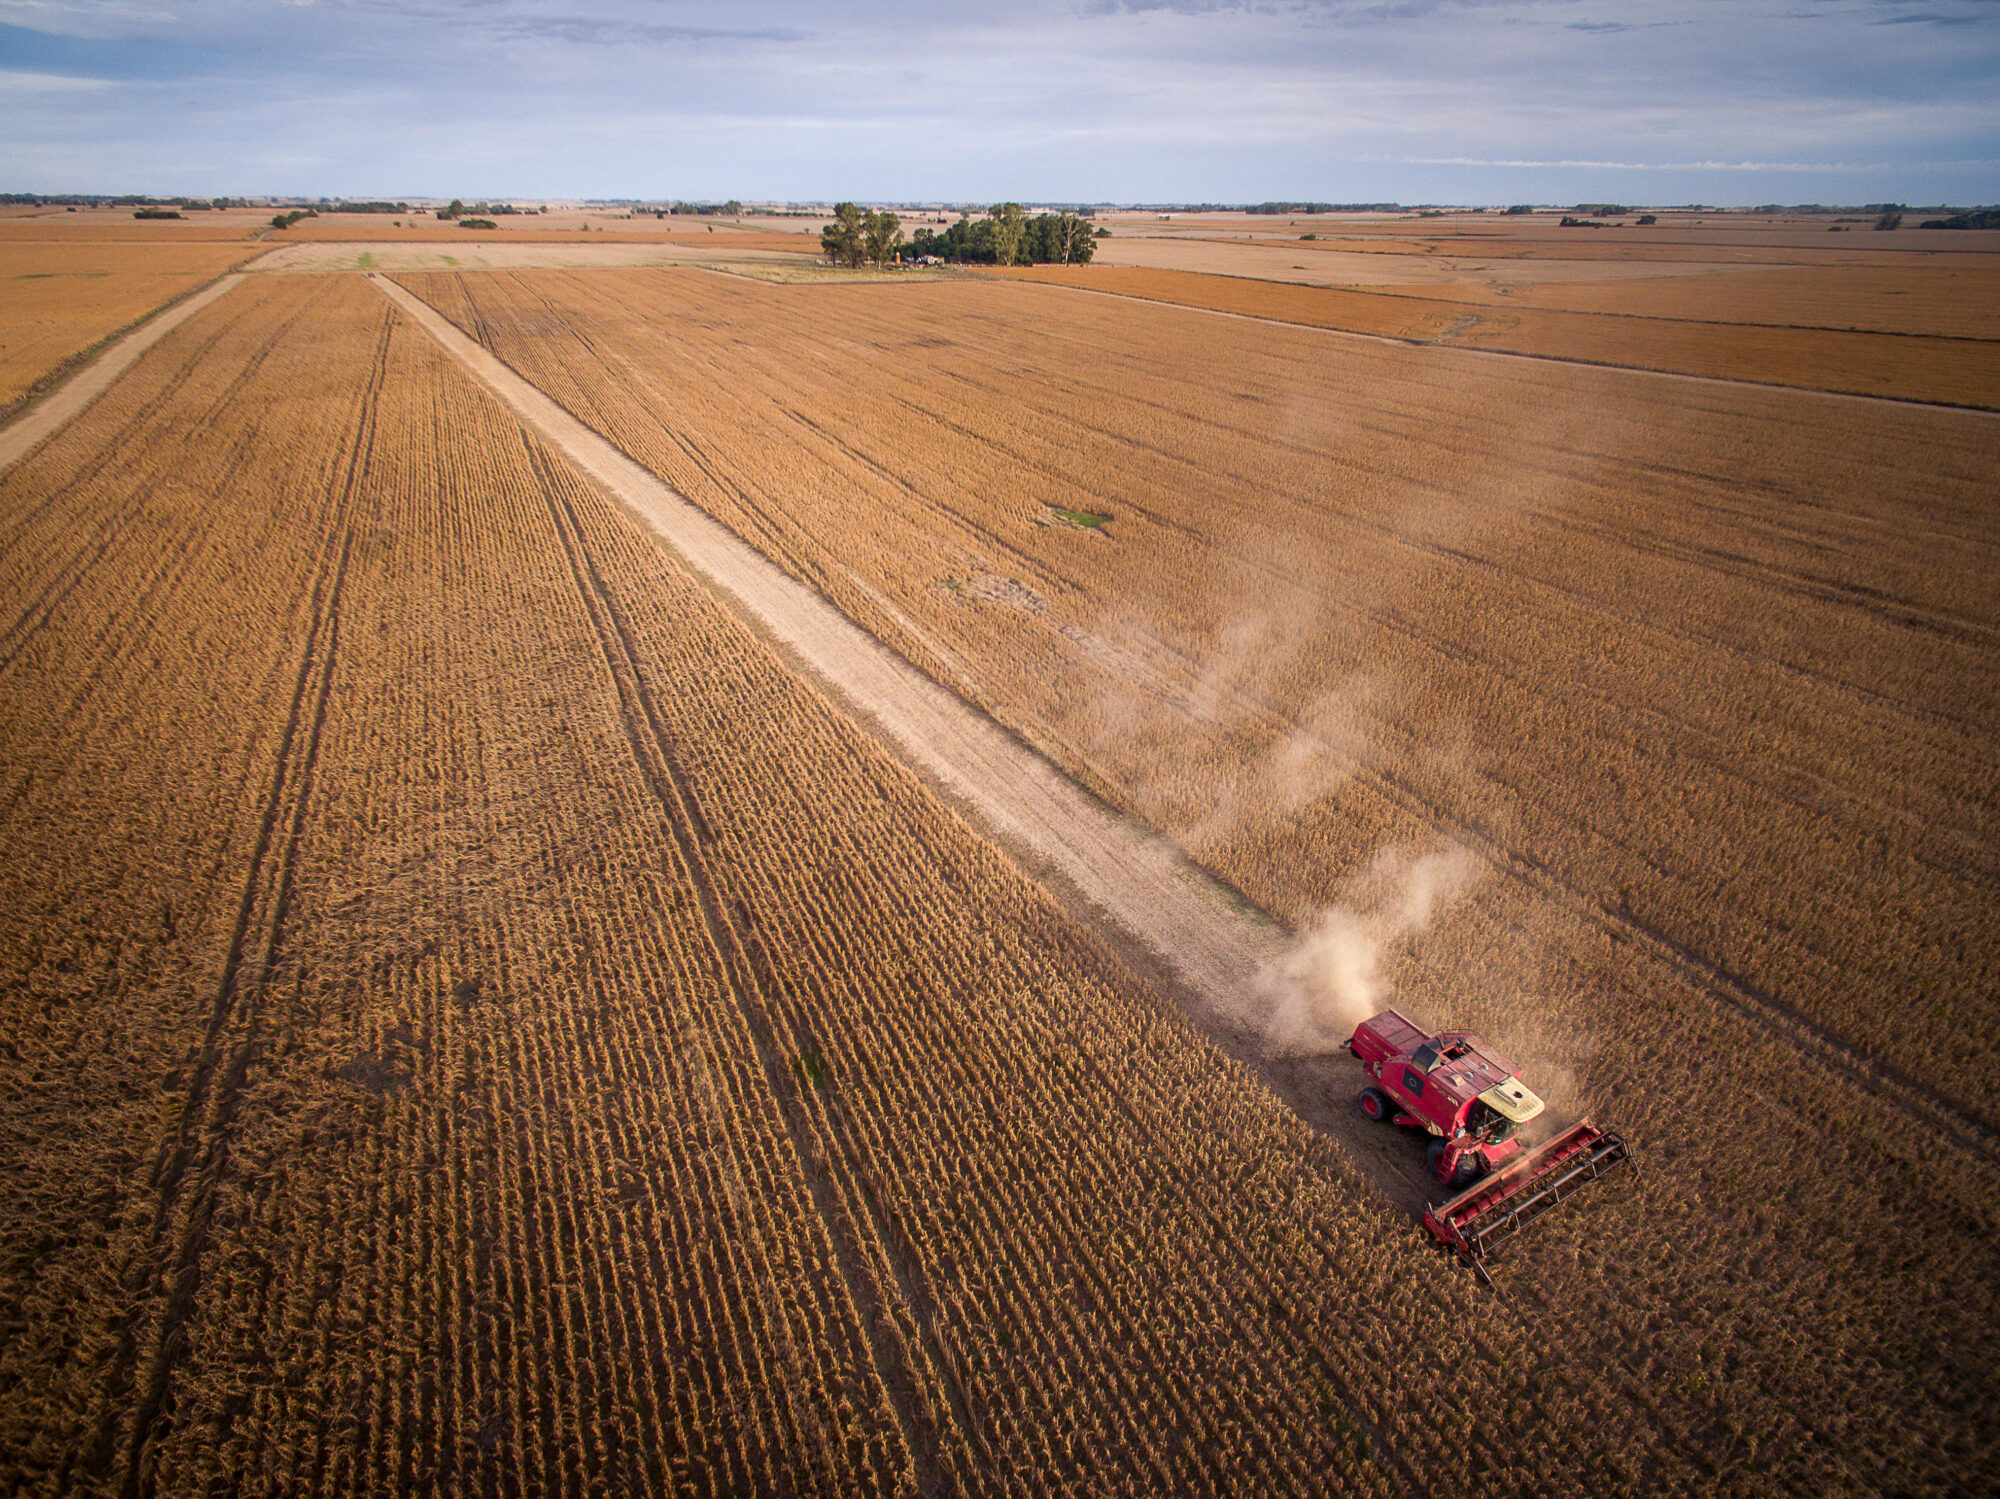 <p>Corn harvest in Buenos Aires province, Argentina. Blockchain technology can bring more transparency and traceability to these crops through tokenisation. Image: Harvest time / Alamy</p>